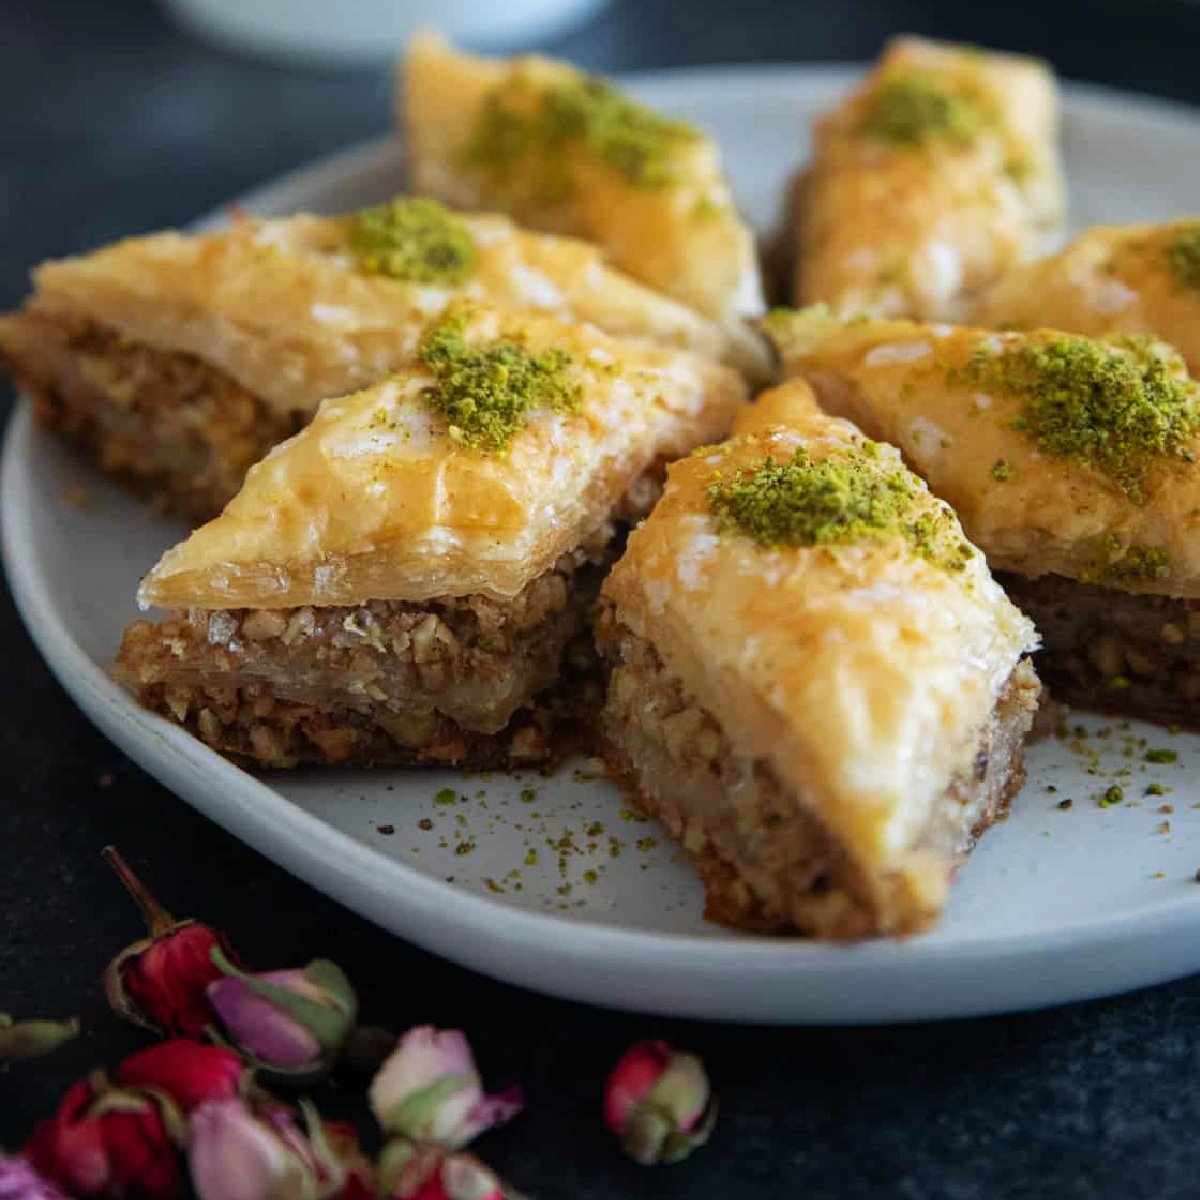 Learn how to make baklava from scratch with my easy tutorial. This delicious dessert is made with flaky phyllo pastry, nuts and simple syrup. You can make this baklava recipe ahead of time and wow everyone!
